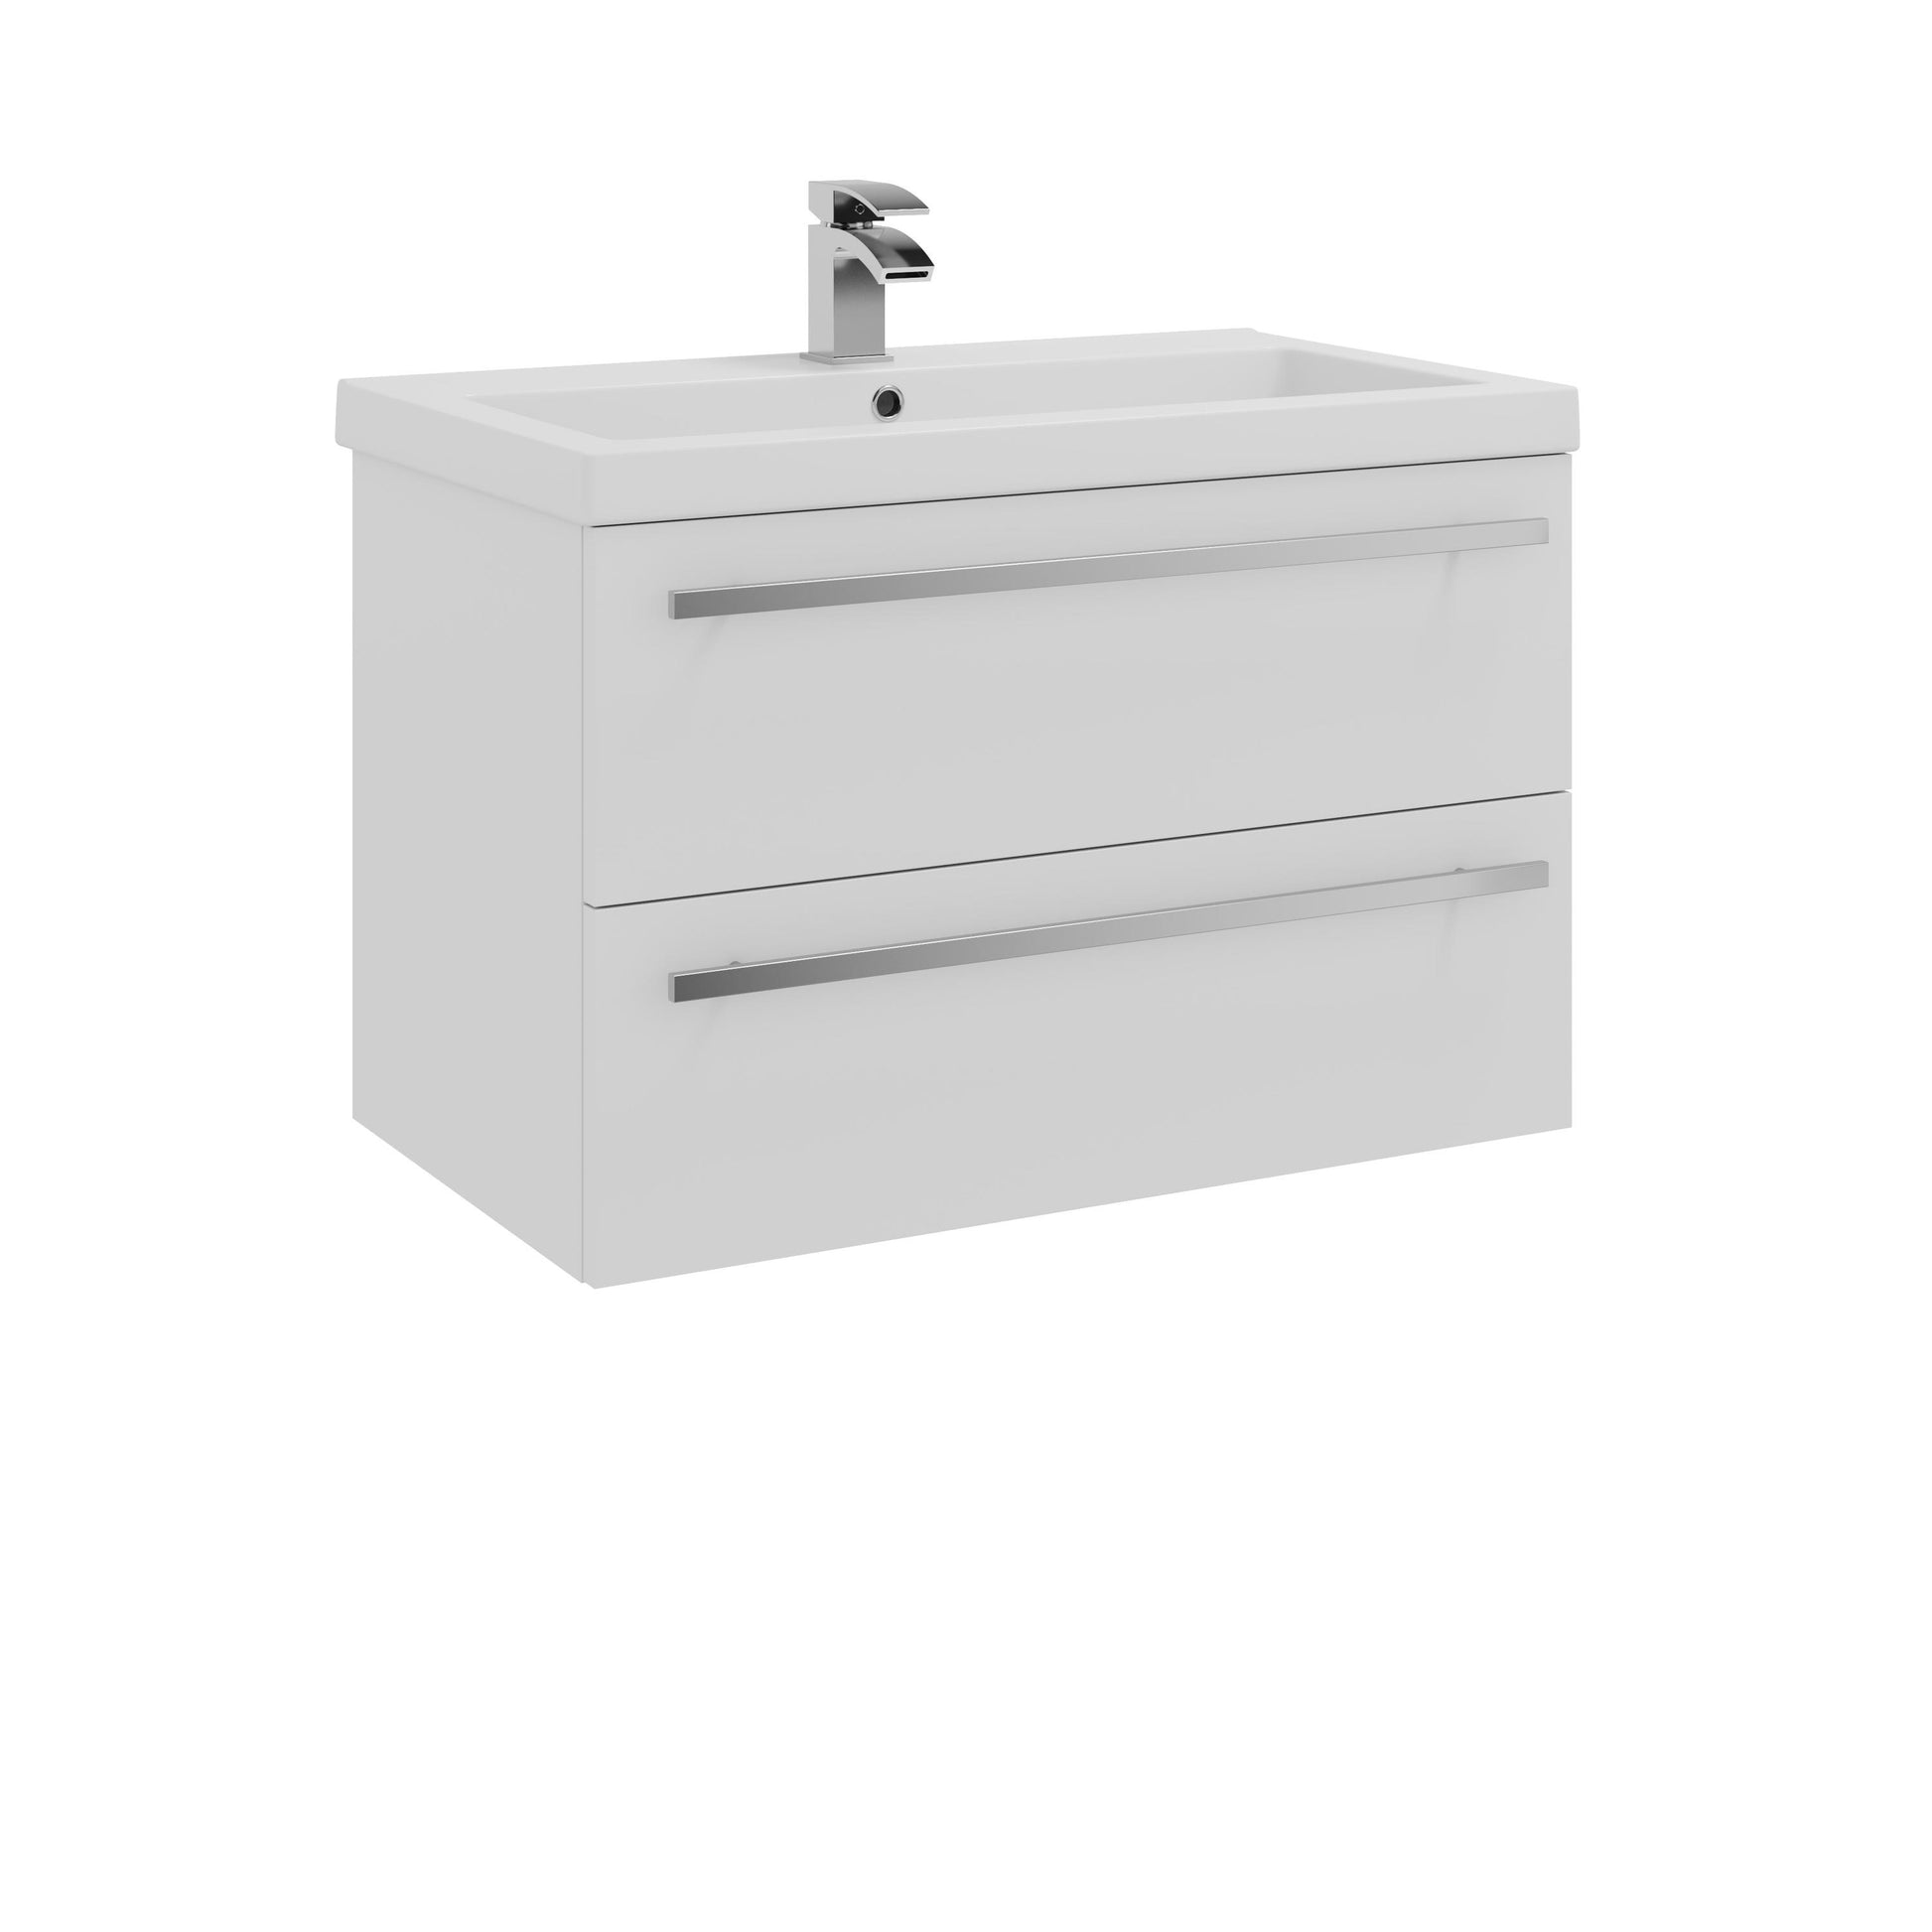 Purity 2 Drawer Unit & Mid Depth Ceramic Basin - Wall Mounted / 800mm Width / White Gloss - Purity - Bliss Bathroom Supplies Ltd -